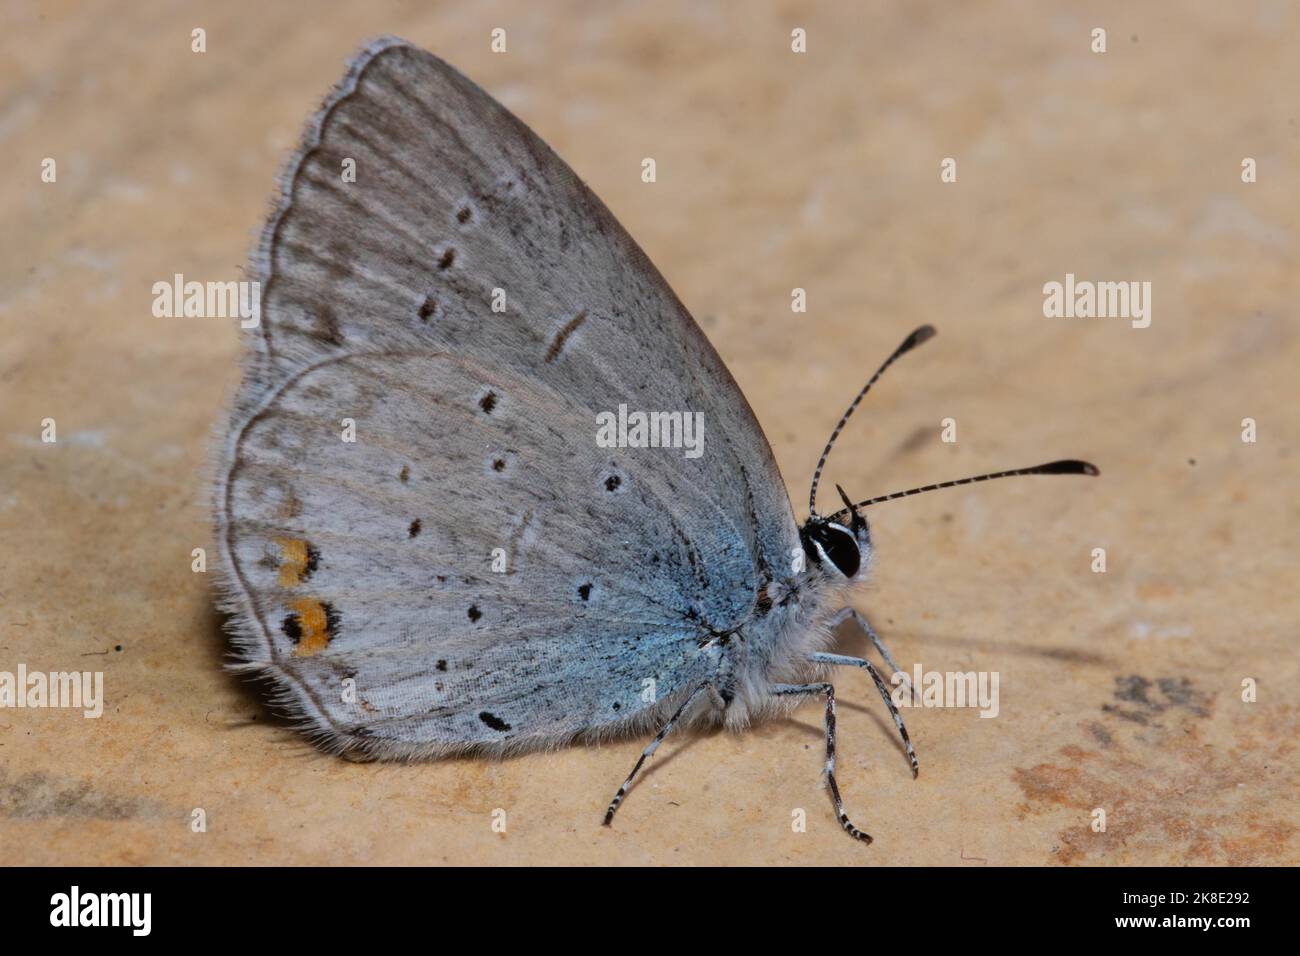 Short-tailed blue butterfly with closed wings sitting on stone slab seen right Stock Photo